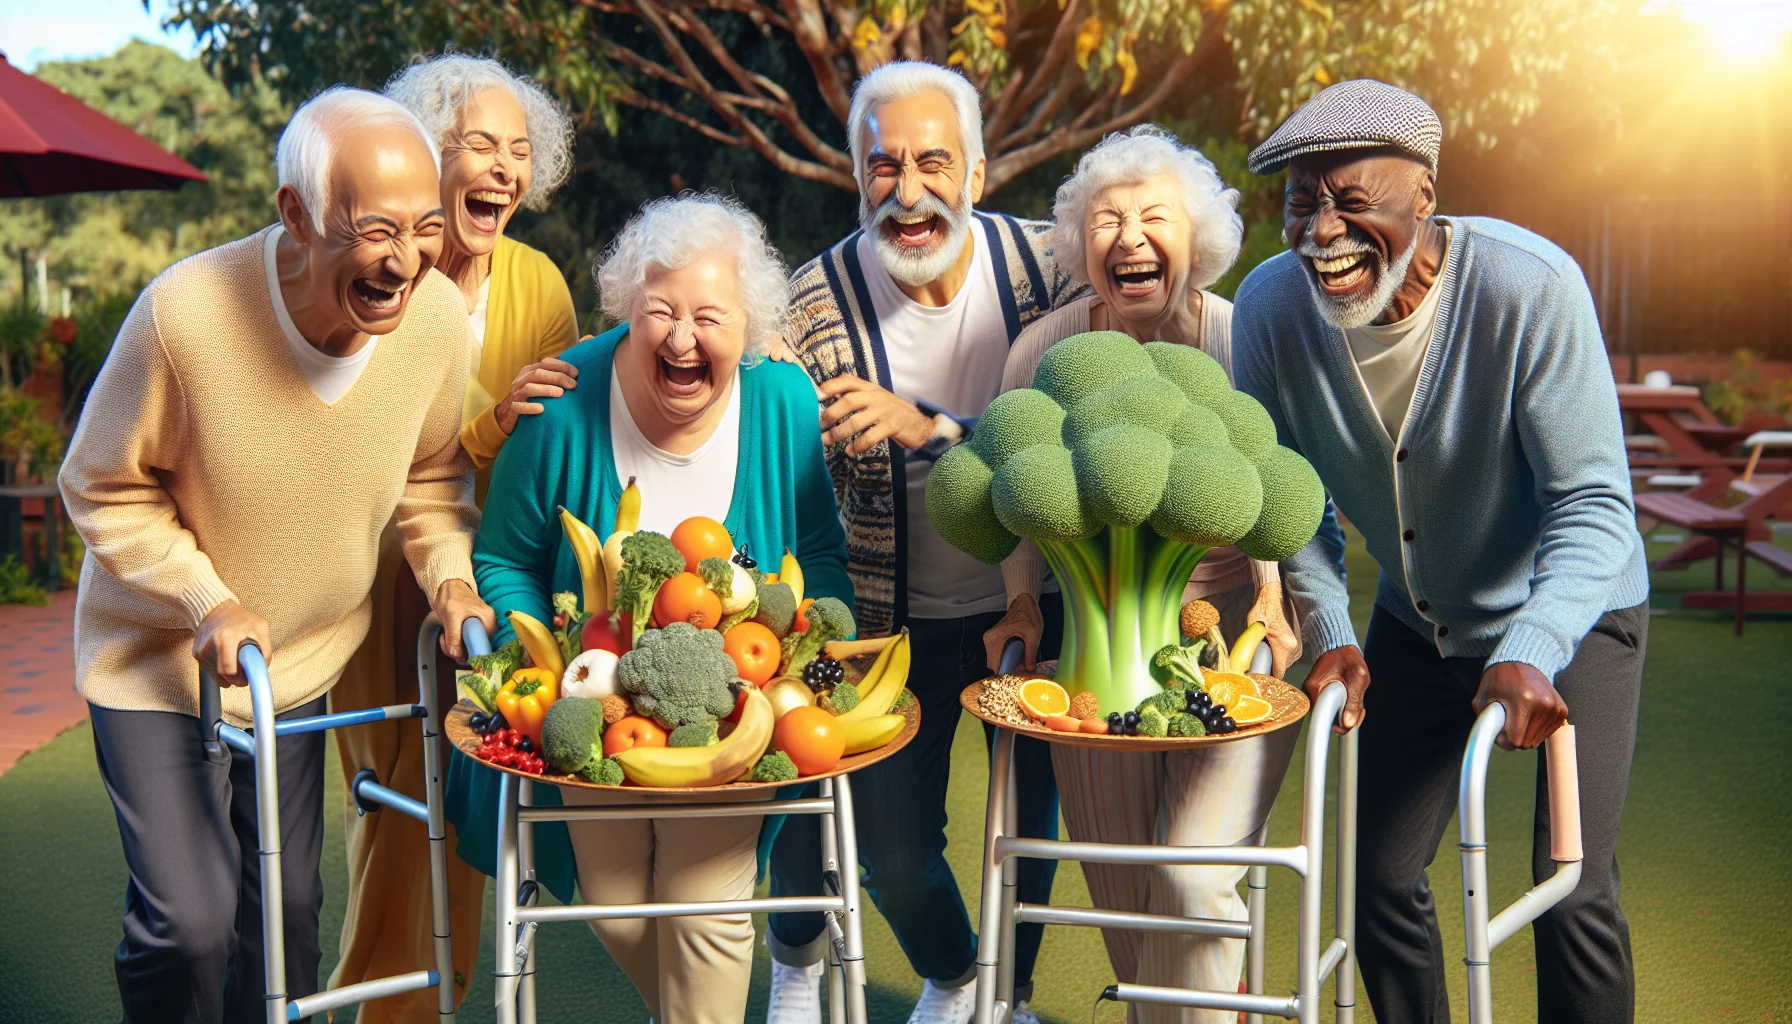 Create a humorous image set in a cozy, sunlit senior citizens' gathering spot, perhaps a park or community center. A diverse group of elderly individuals are joyfully partaking in a food-themed contest, possibly racing with walkers to reach a glittering trophy that is humorously oversized and shaped like a broccoli stalk - a symbol of high fiber, gluten-free food. The participants, a South Asian man, a Caucasian woman, a Middle Eastern woman, along with a Black man are laughing heartily, mischievously nudging each other, while balancing plates filled with colorful vegetables, fruits, and gluten-free grains - a playful nod to their healthy diet. 